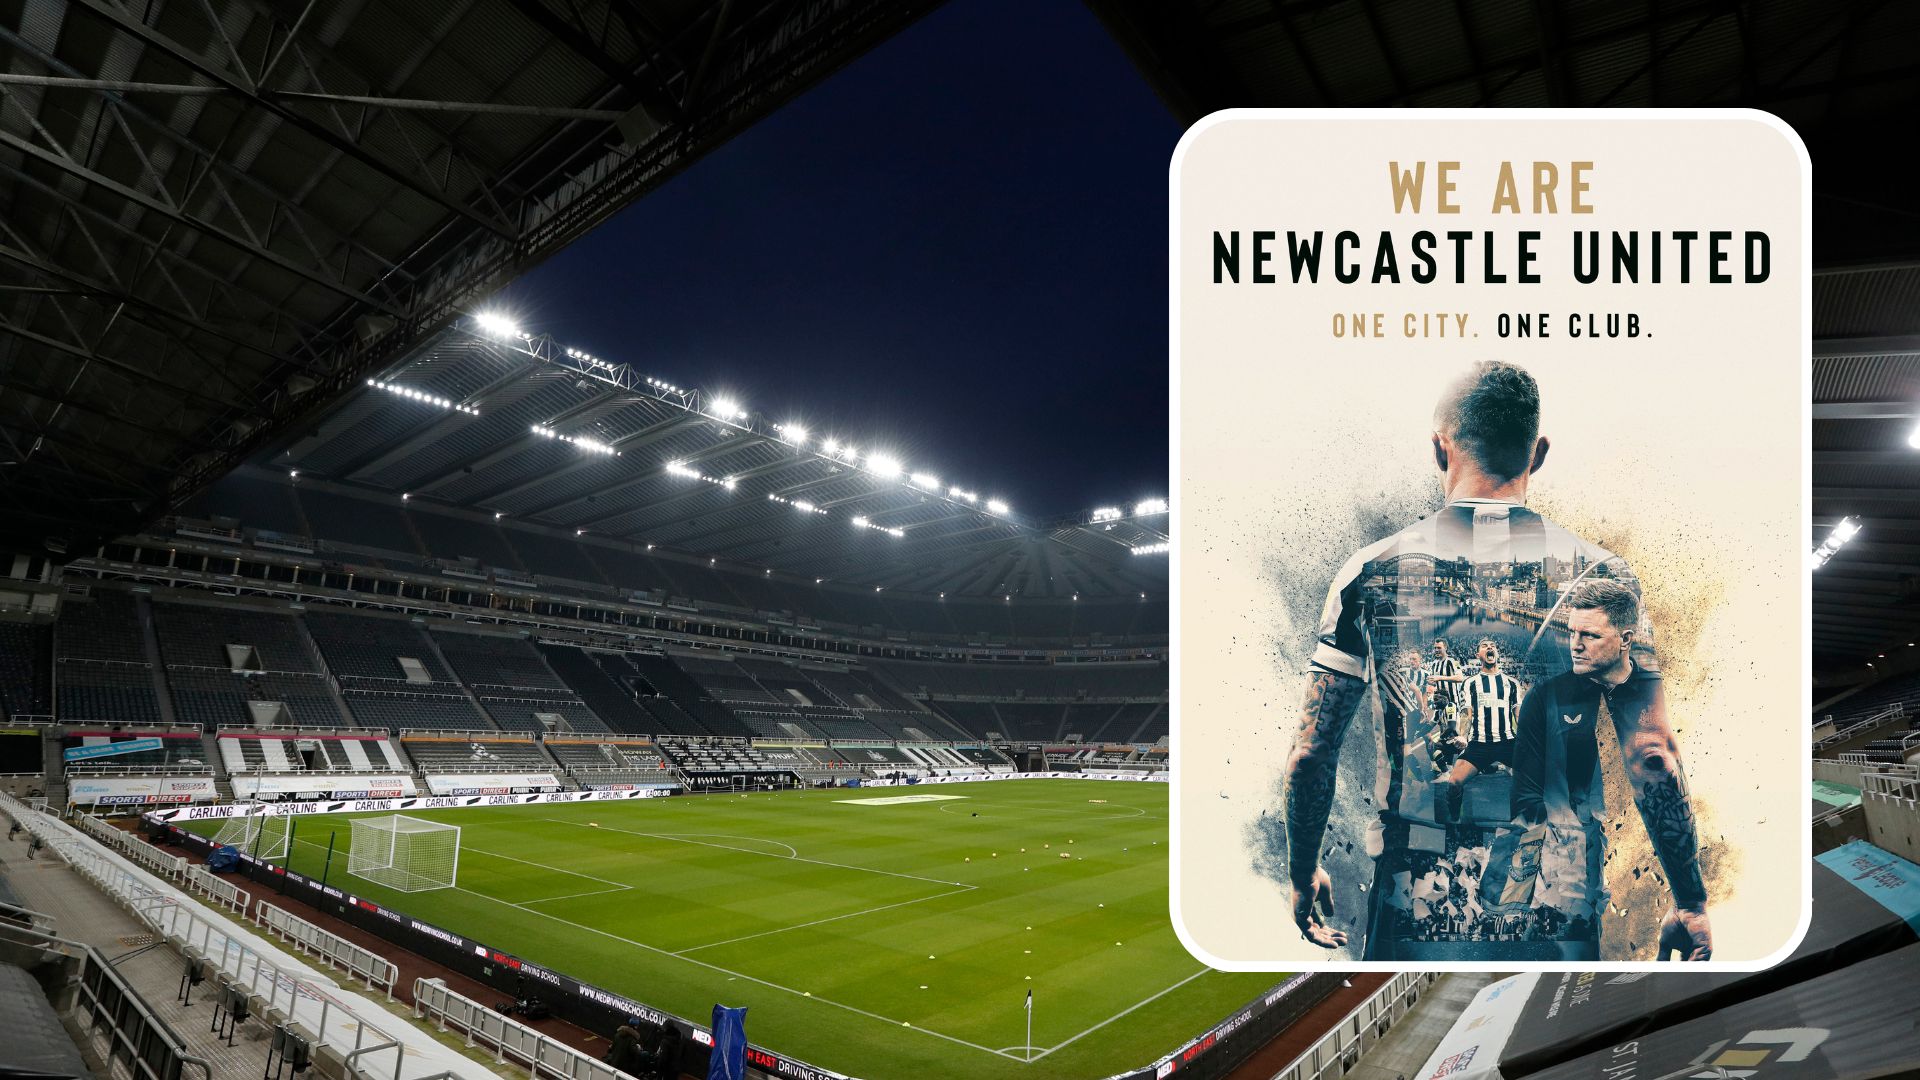 It was known this was coming soon and now we have a trailer, plus air dates for the new Amazon series We are Newcastle United.